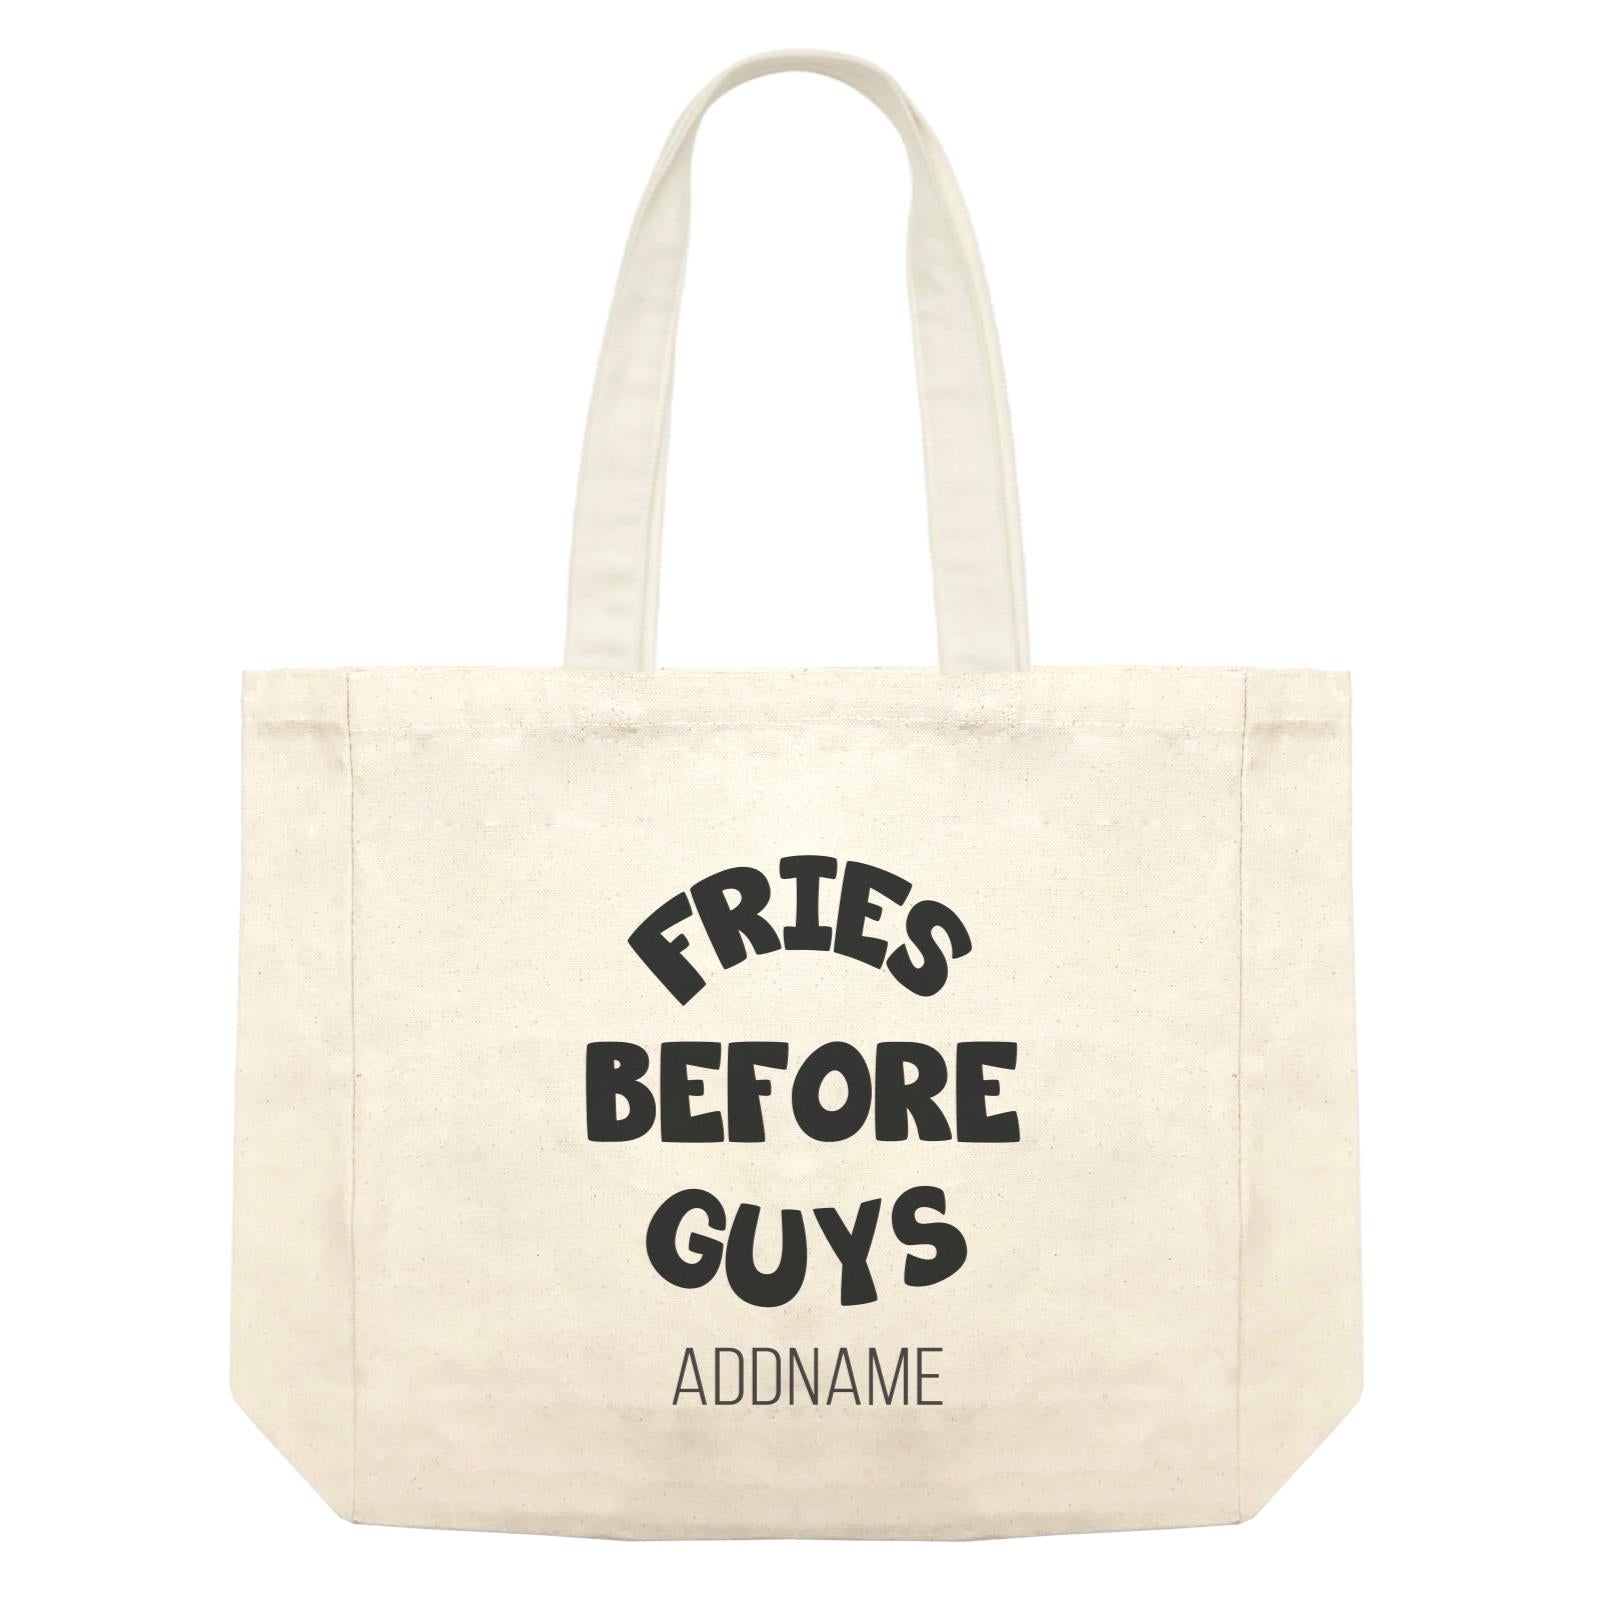 Girl Boss Quotes Fries Before Guys Addname Shopping Bag